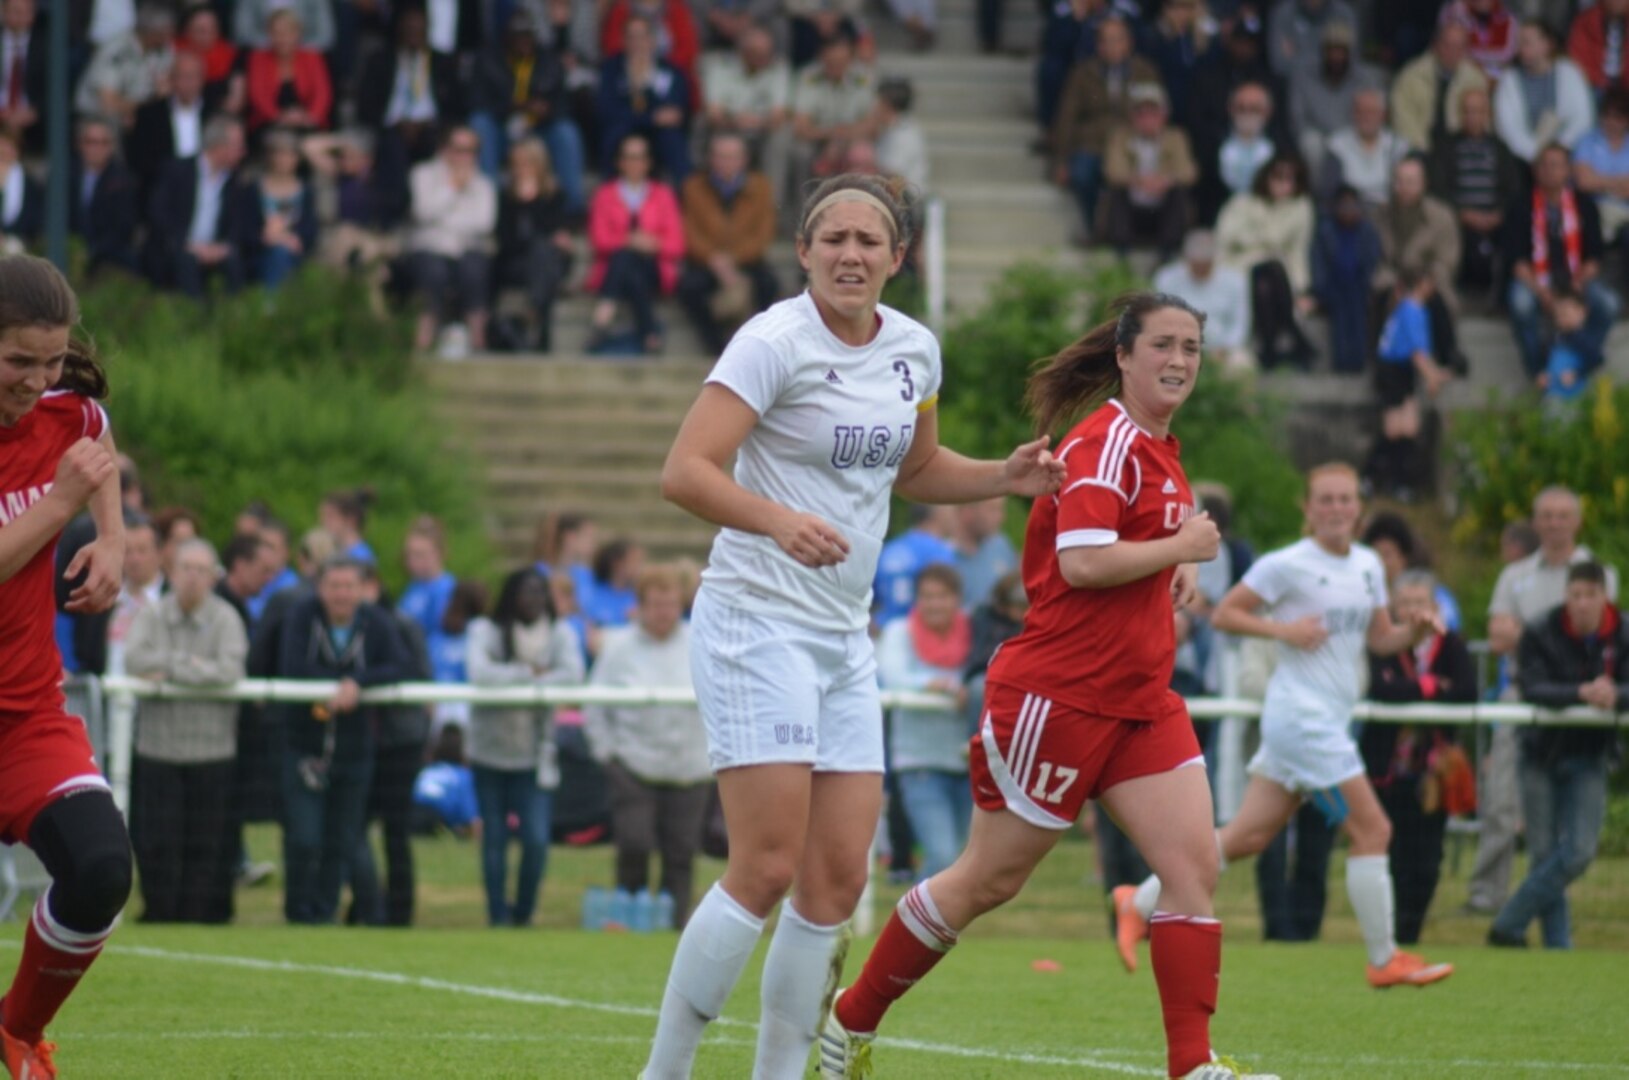 Marine 1st Lt. Kate Herren of New River, N.C. scored the opening goal against Canada in overtime. France hosted the 2016 Conseil International du Sport Militaire (CISM) World Football Cup in Rennes, France from 24 May to 5 June.  USA finished 7th overall as host nation France won the Cup.